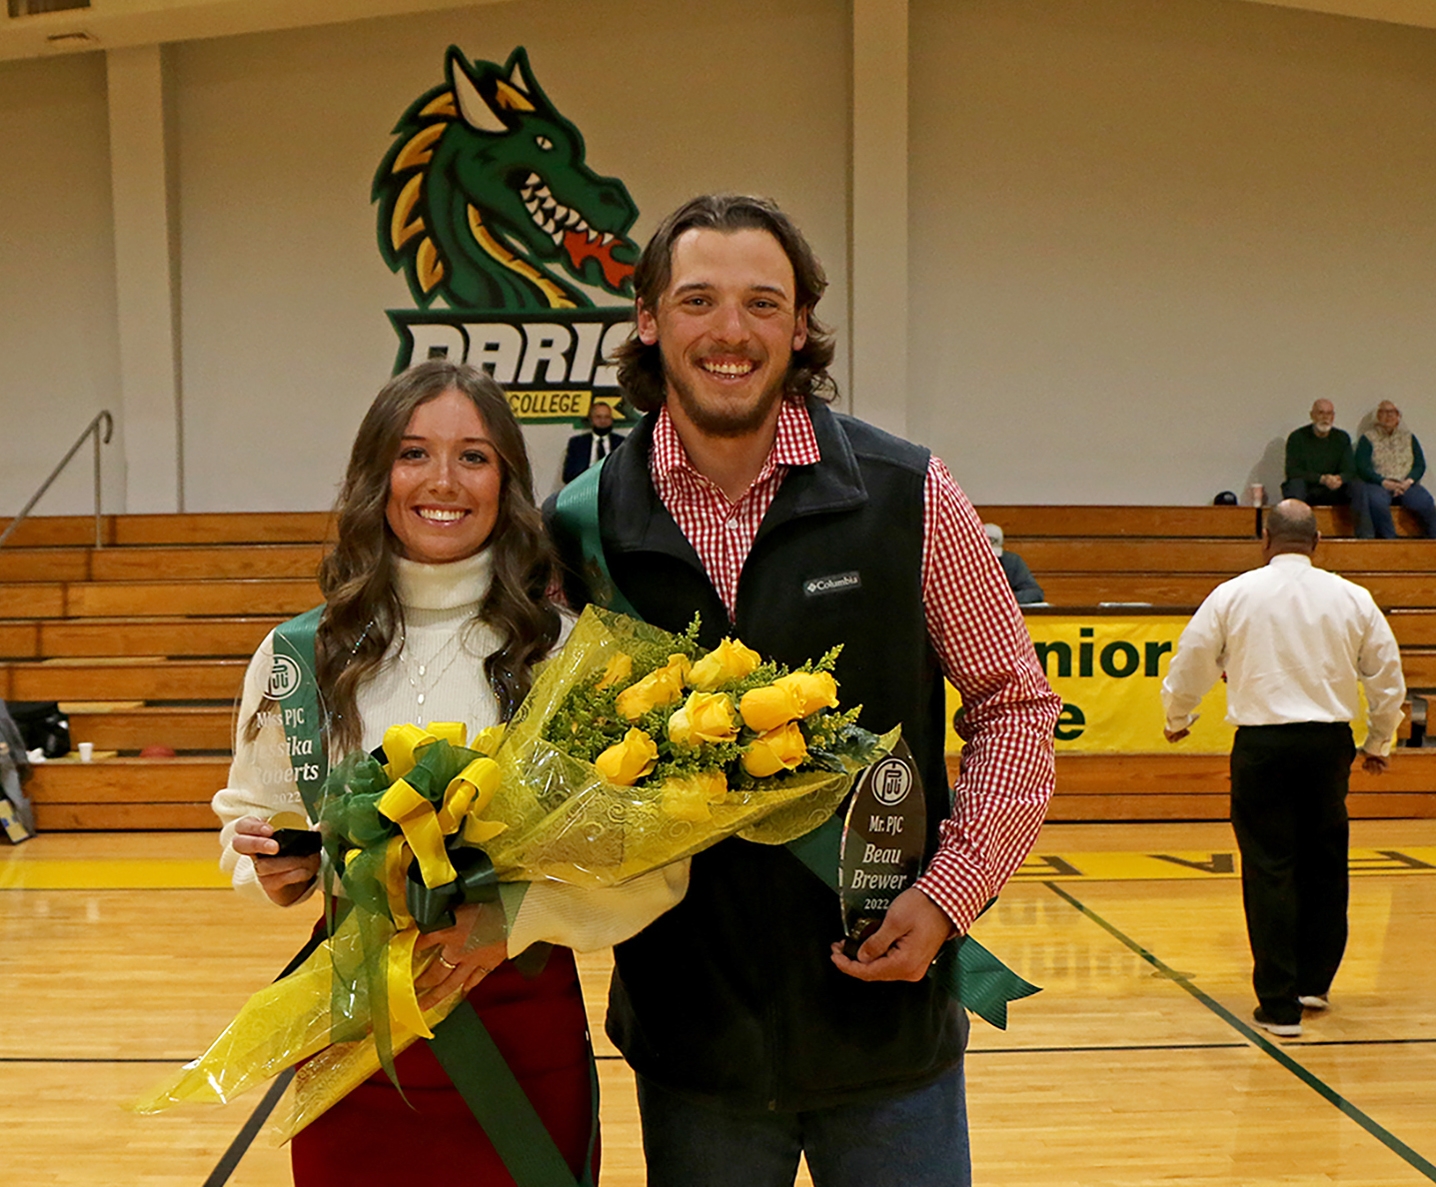 PJC-Sulphur Springs names homecoming king and queen 2022